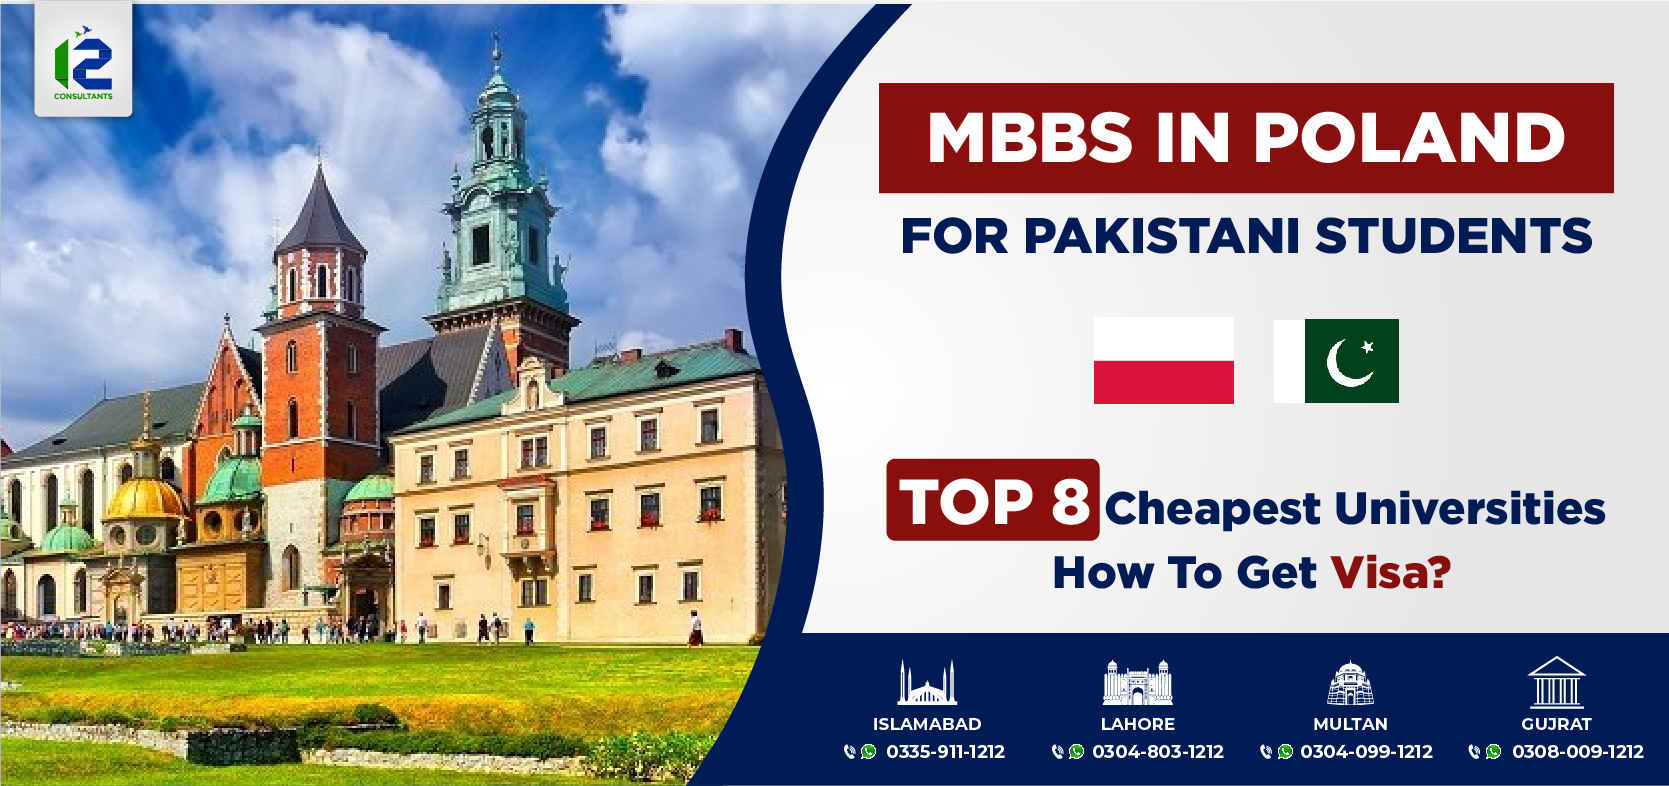 MBBS in Poland for Pakistani Students